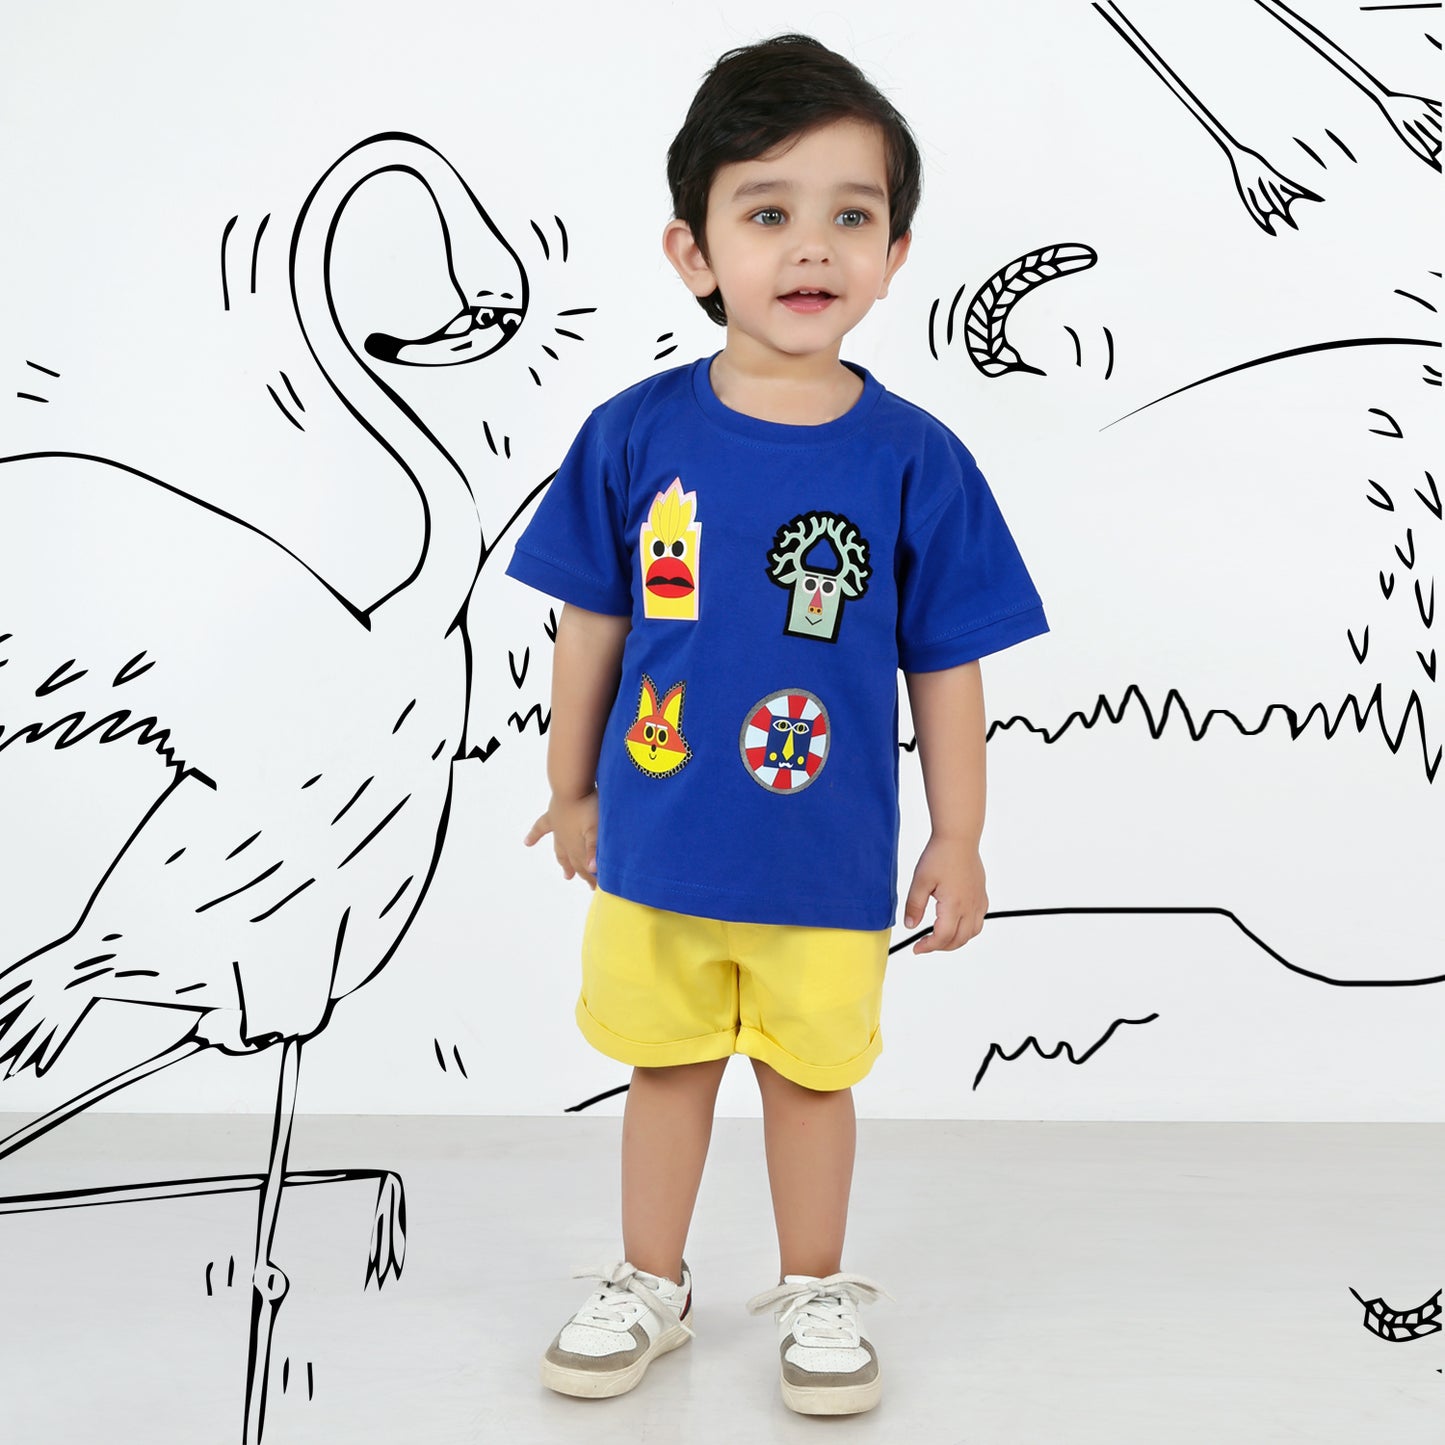 Get your little dude ready to play with our cartoon set!